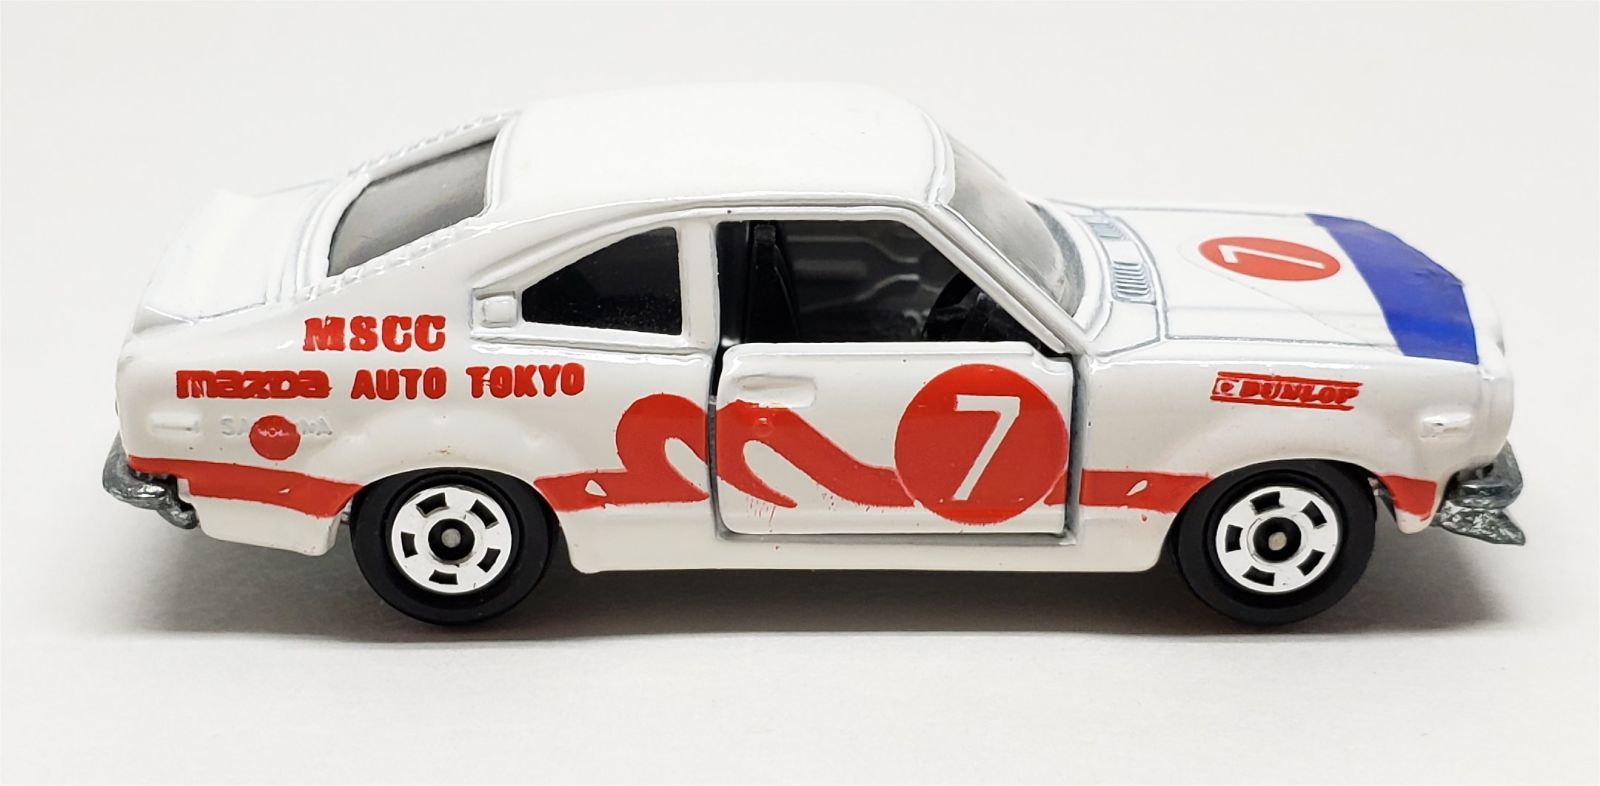 Illustration for article titled [REVIEW] Tomica Mazda Savanna GT - racing version